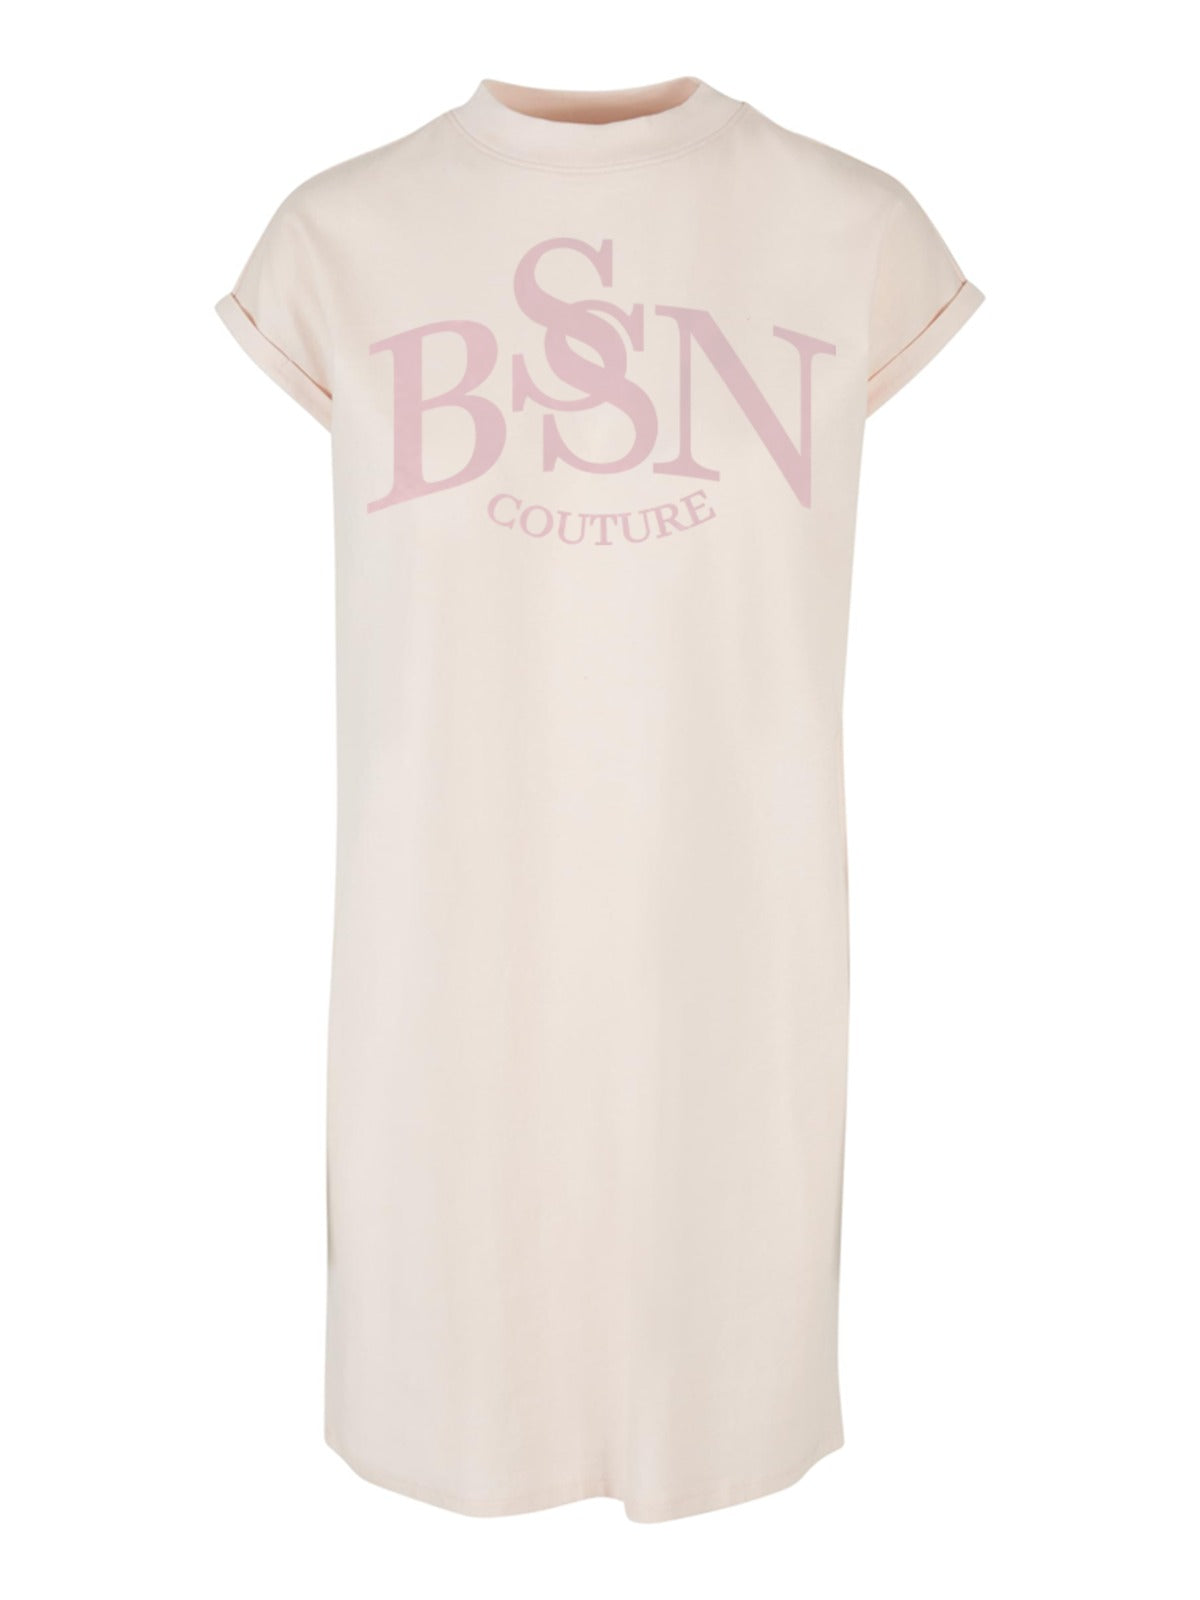 BSN COUTURE Tshirt Dress - Pink